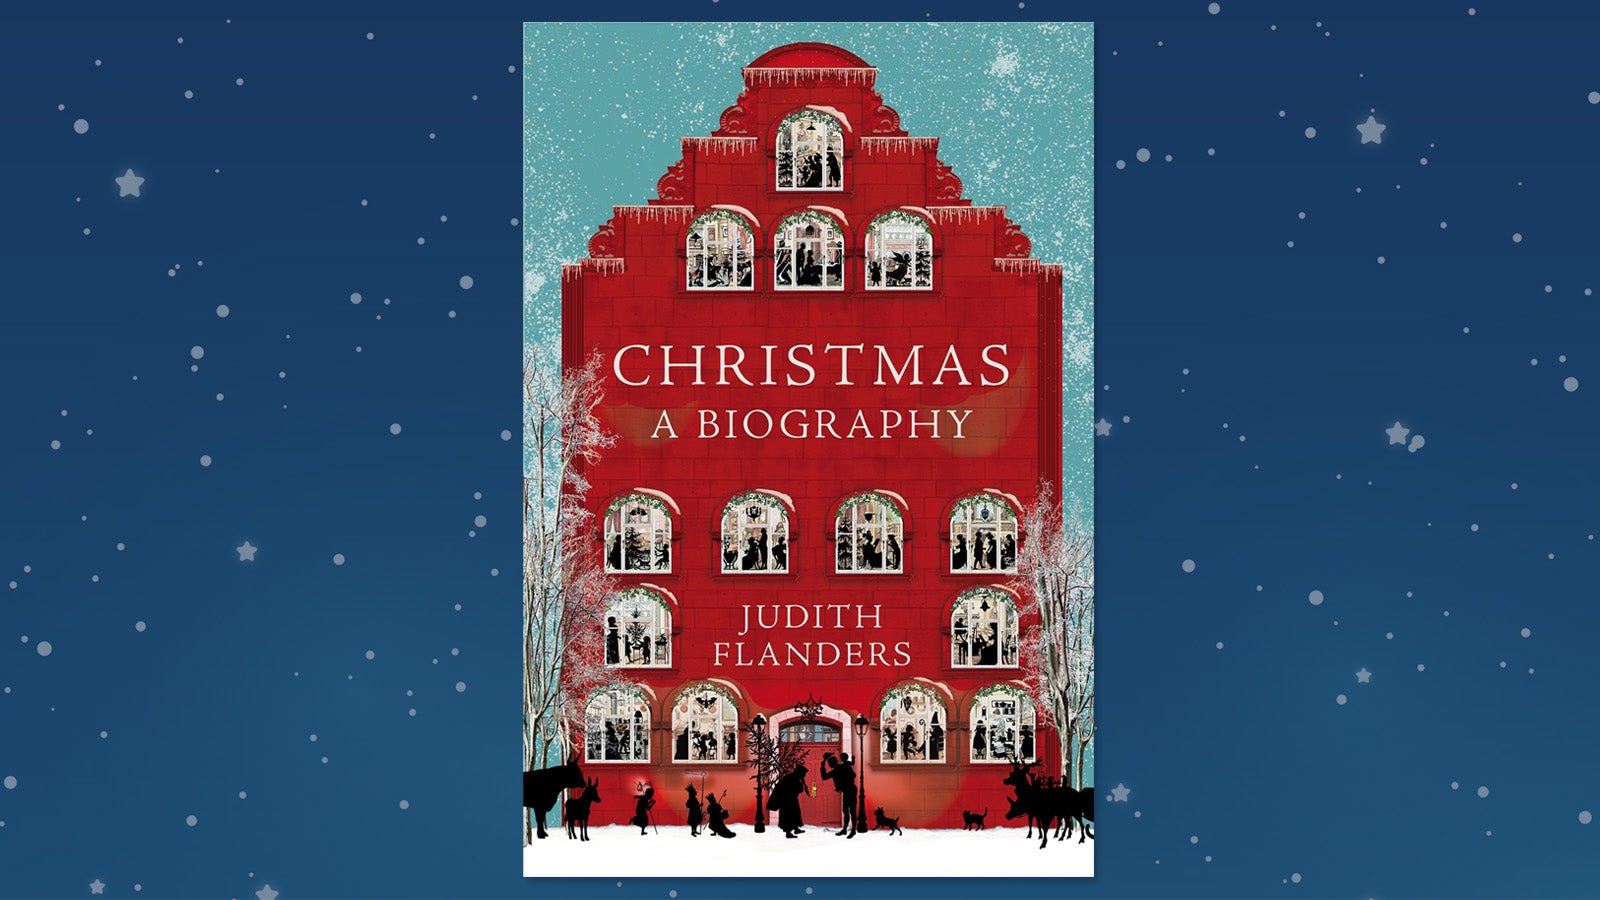 A jacket cover of a 'Christmas Biography' by Judith Flanders, depicting a red building with many windows and a snow scene in front of the house